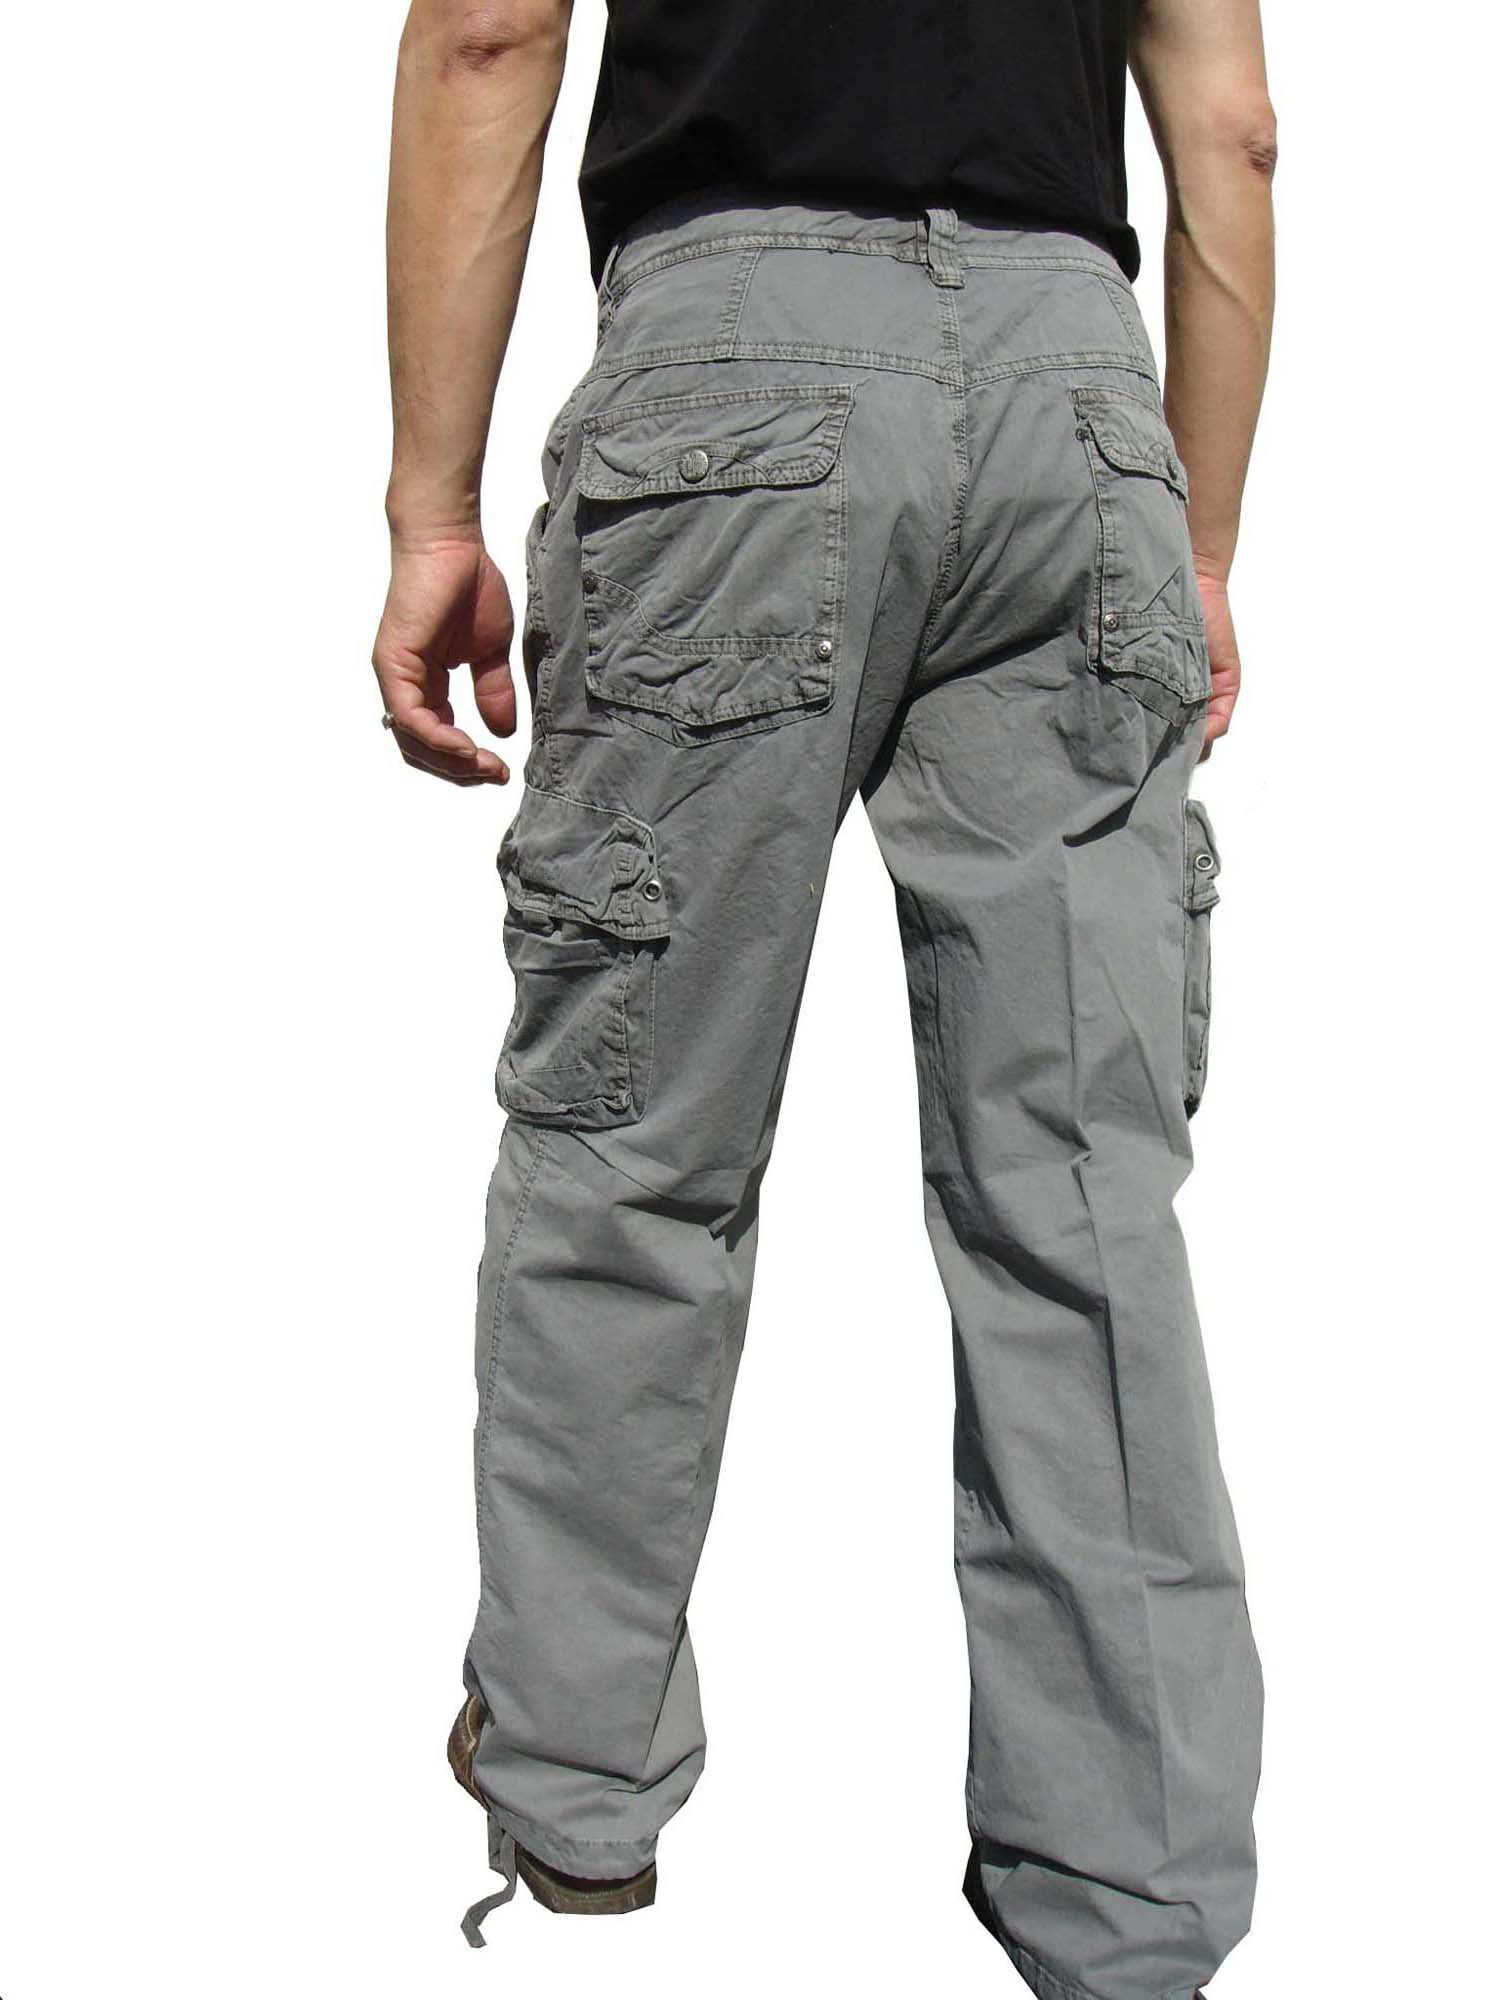 Mens Military-Style Grey Color Cargo Pants 27_36x32